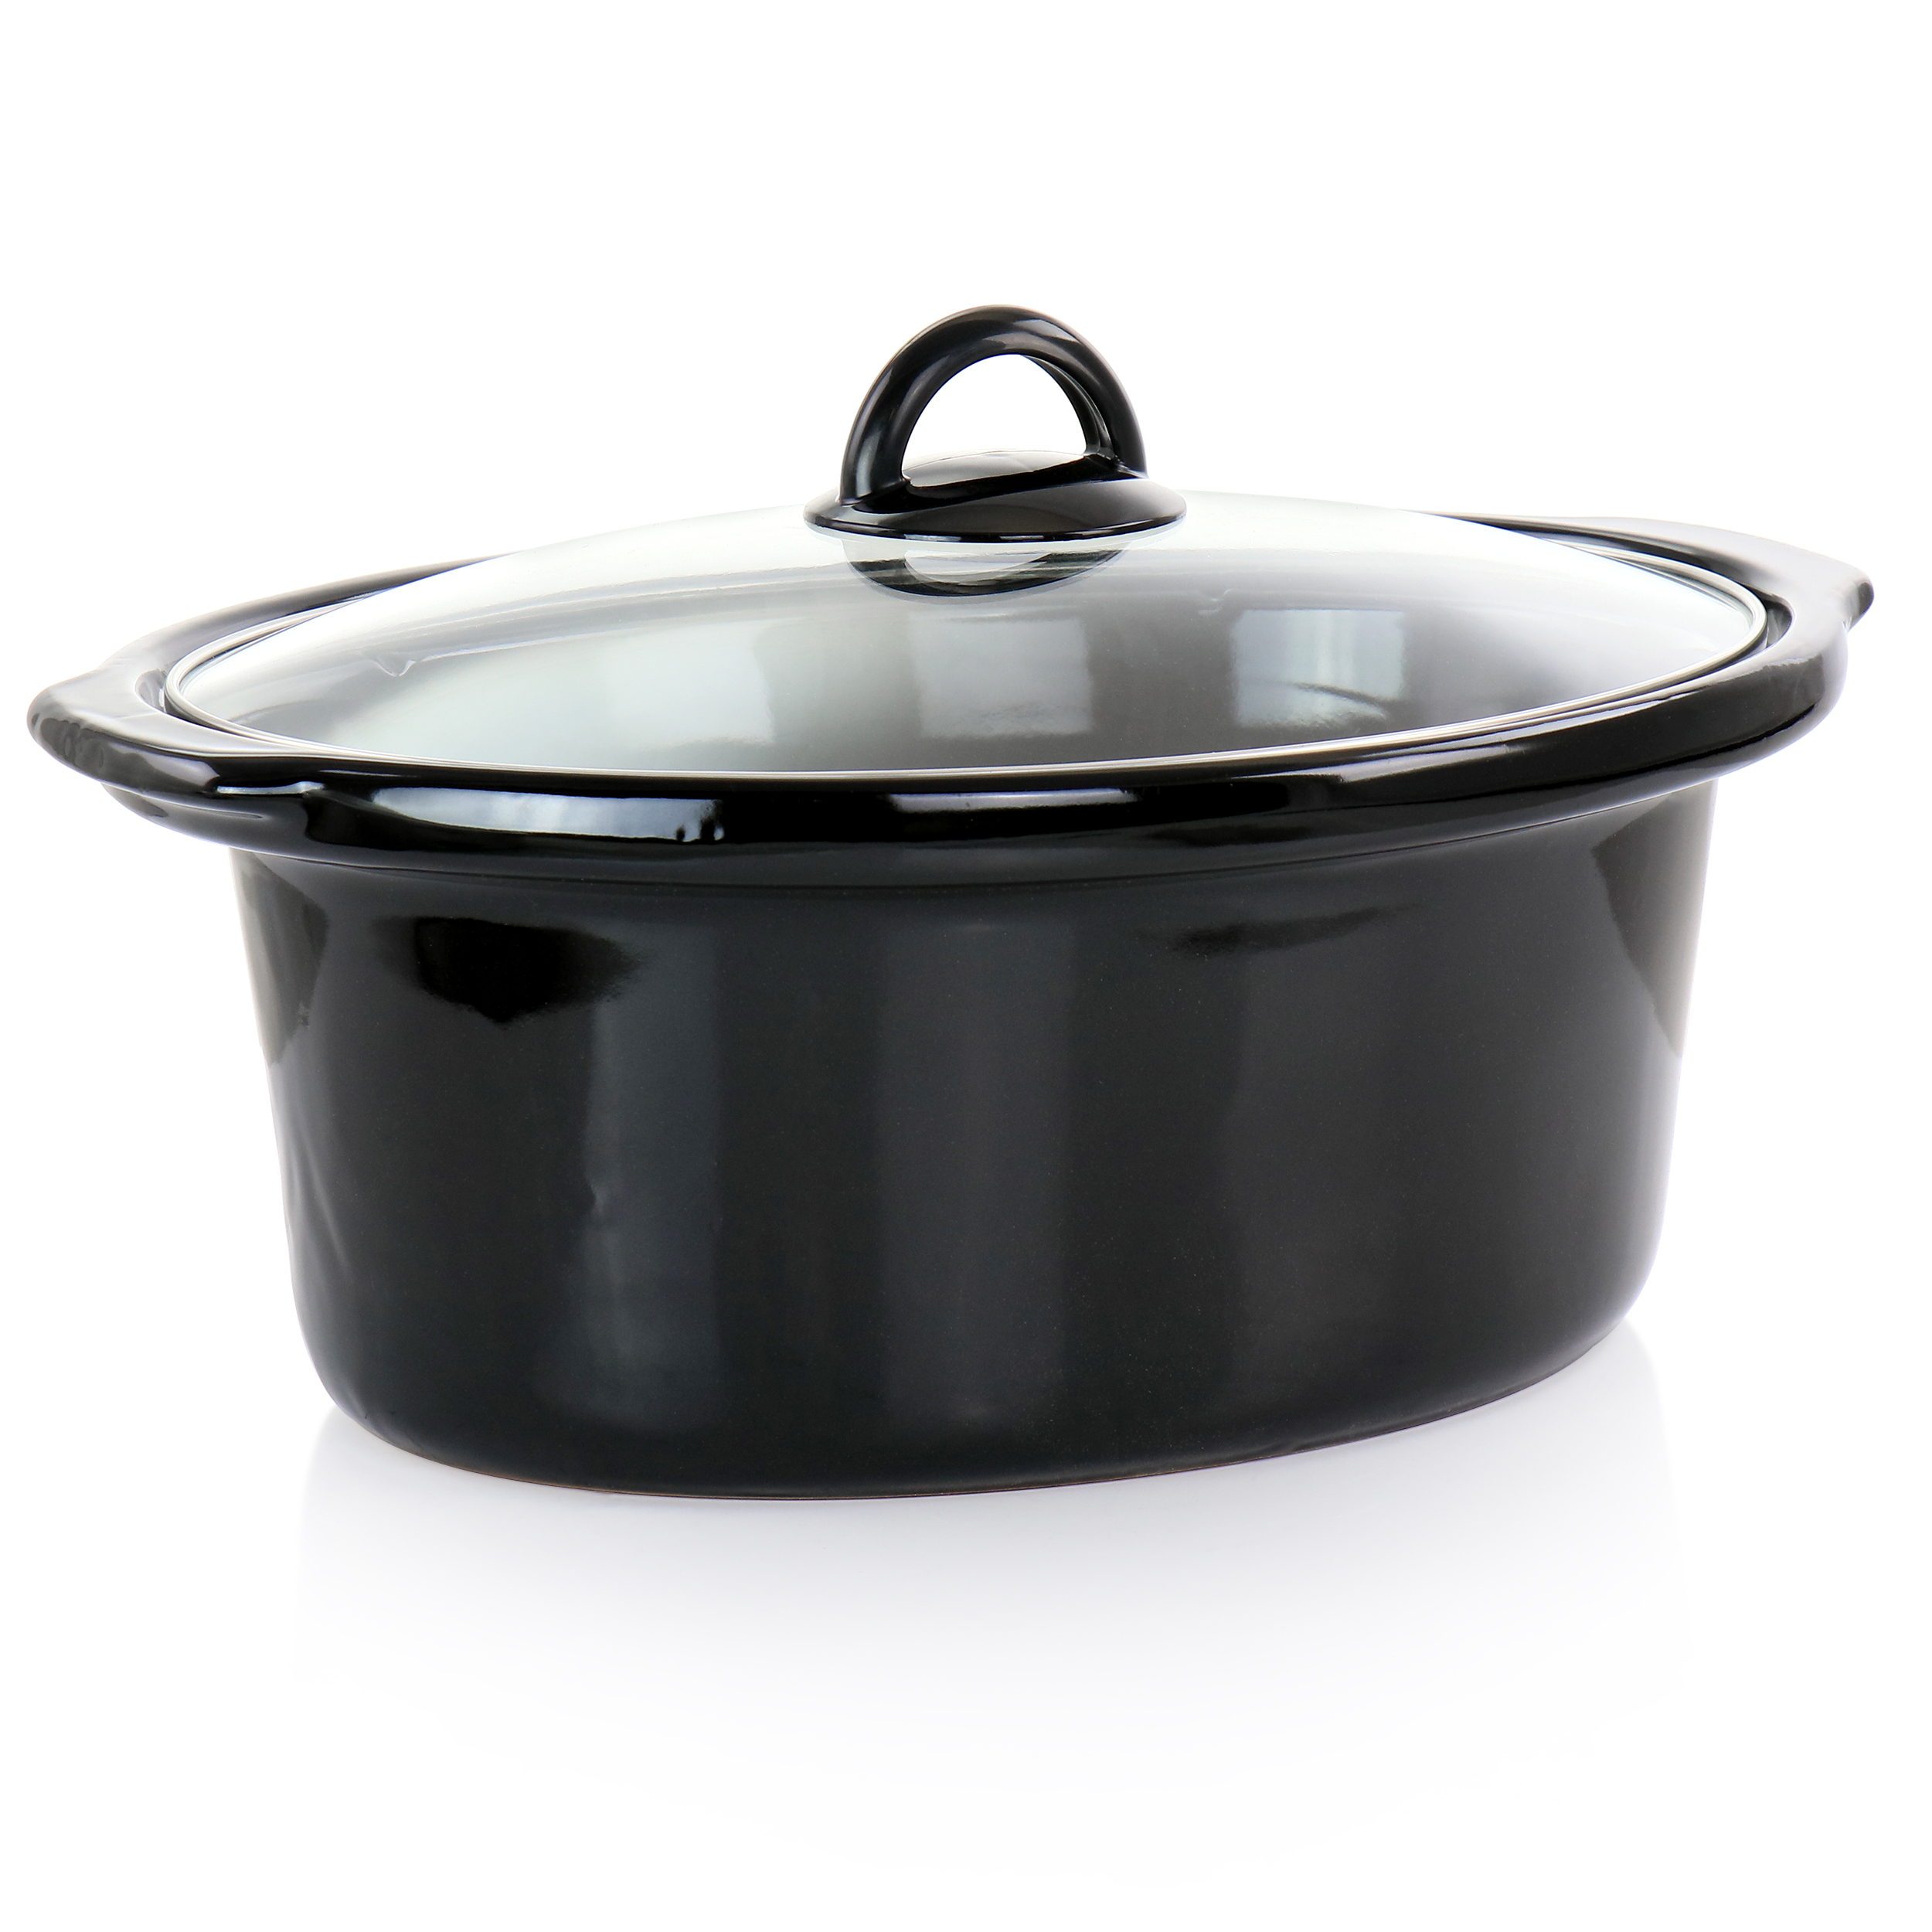 970117929M Better Chef 4 Quart Oval Slow Cooker with Removable